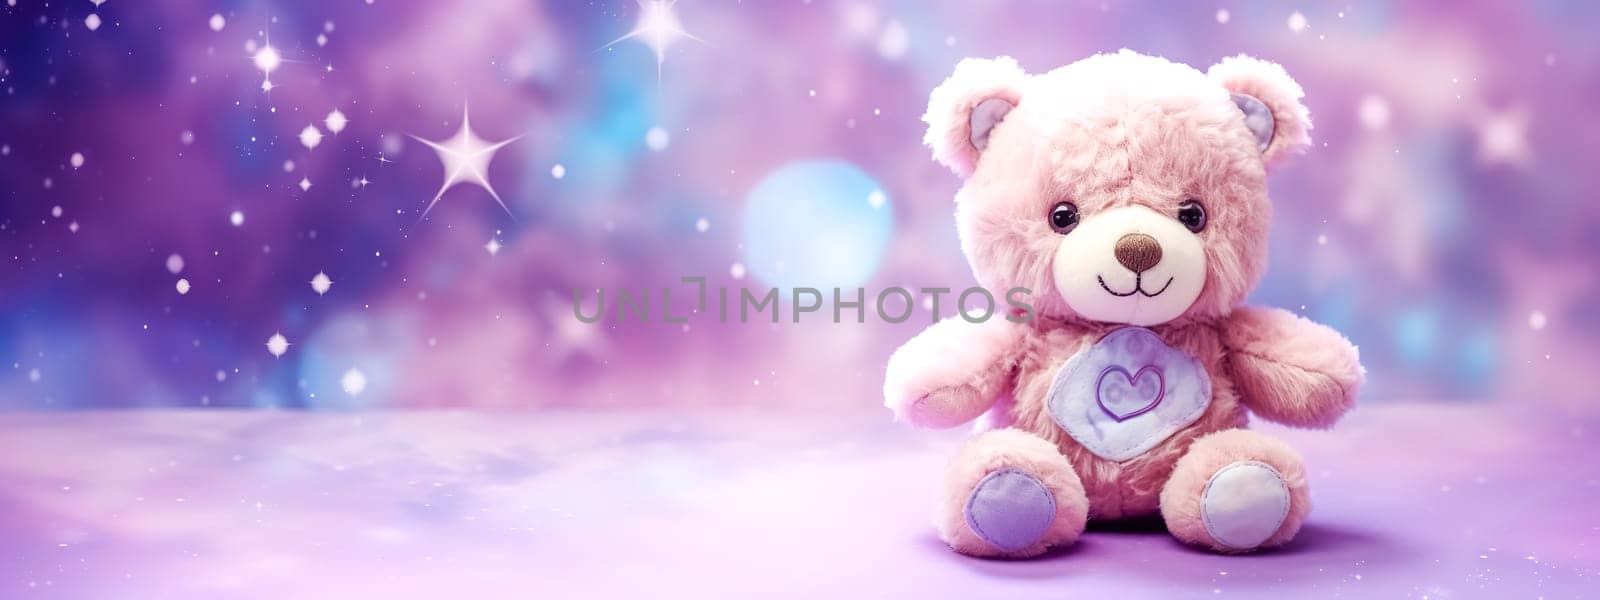 plush teddy bear with a heart on its chest, set against a whimsical, starry background, conveying warmth and comfort. banner with copy space by Edophoto